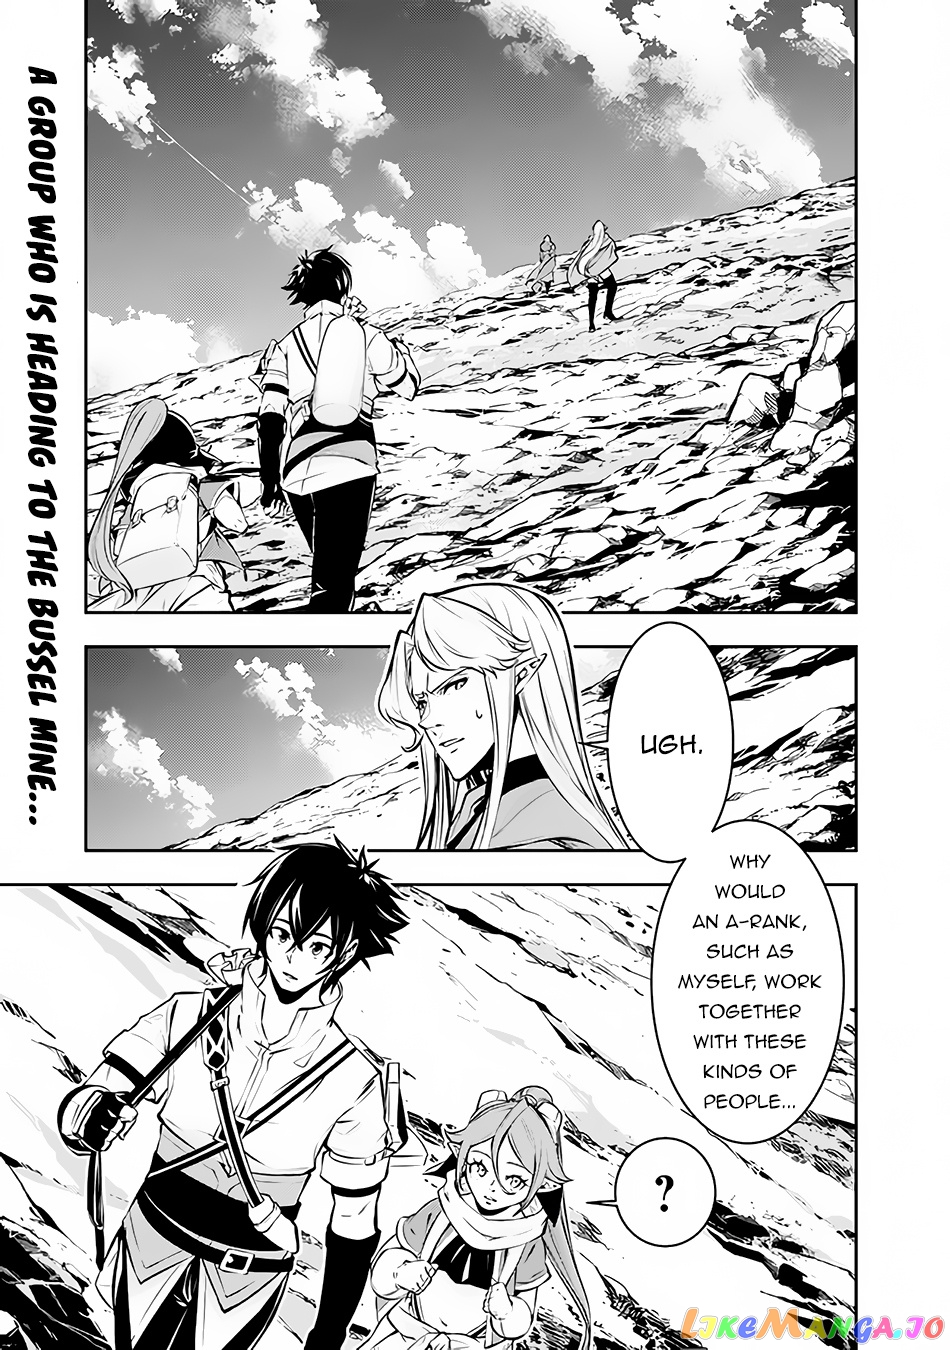 The Strongest Magical Swordsman Ever Reborn As An F-Rank Adventurer. chapter 91 - page 2